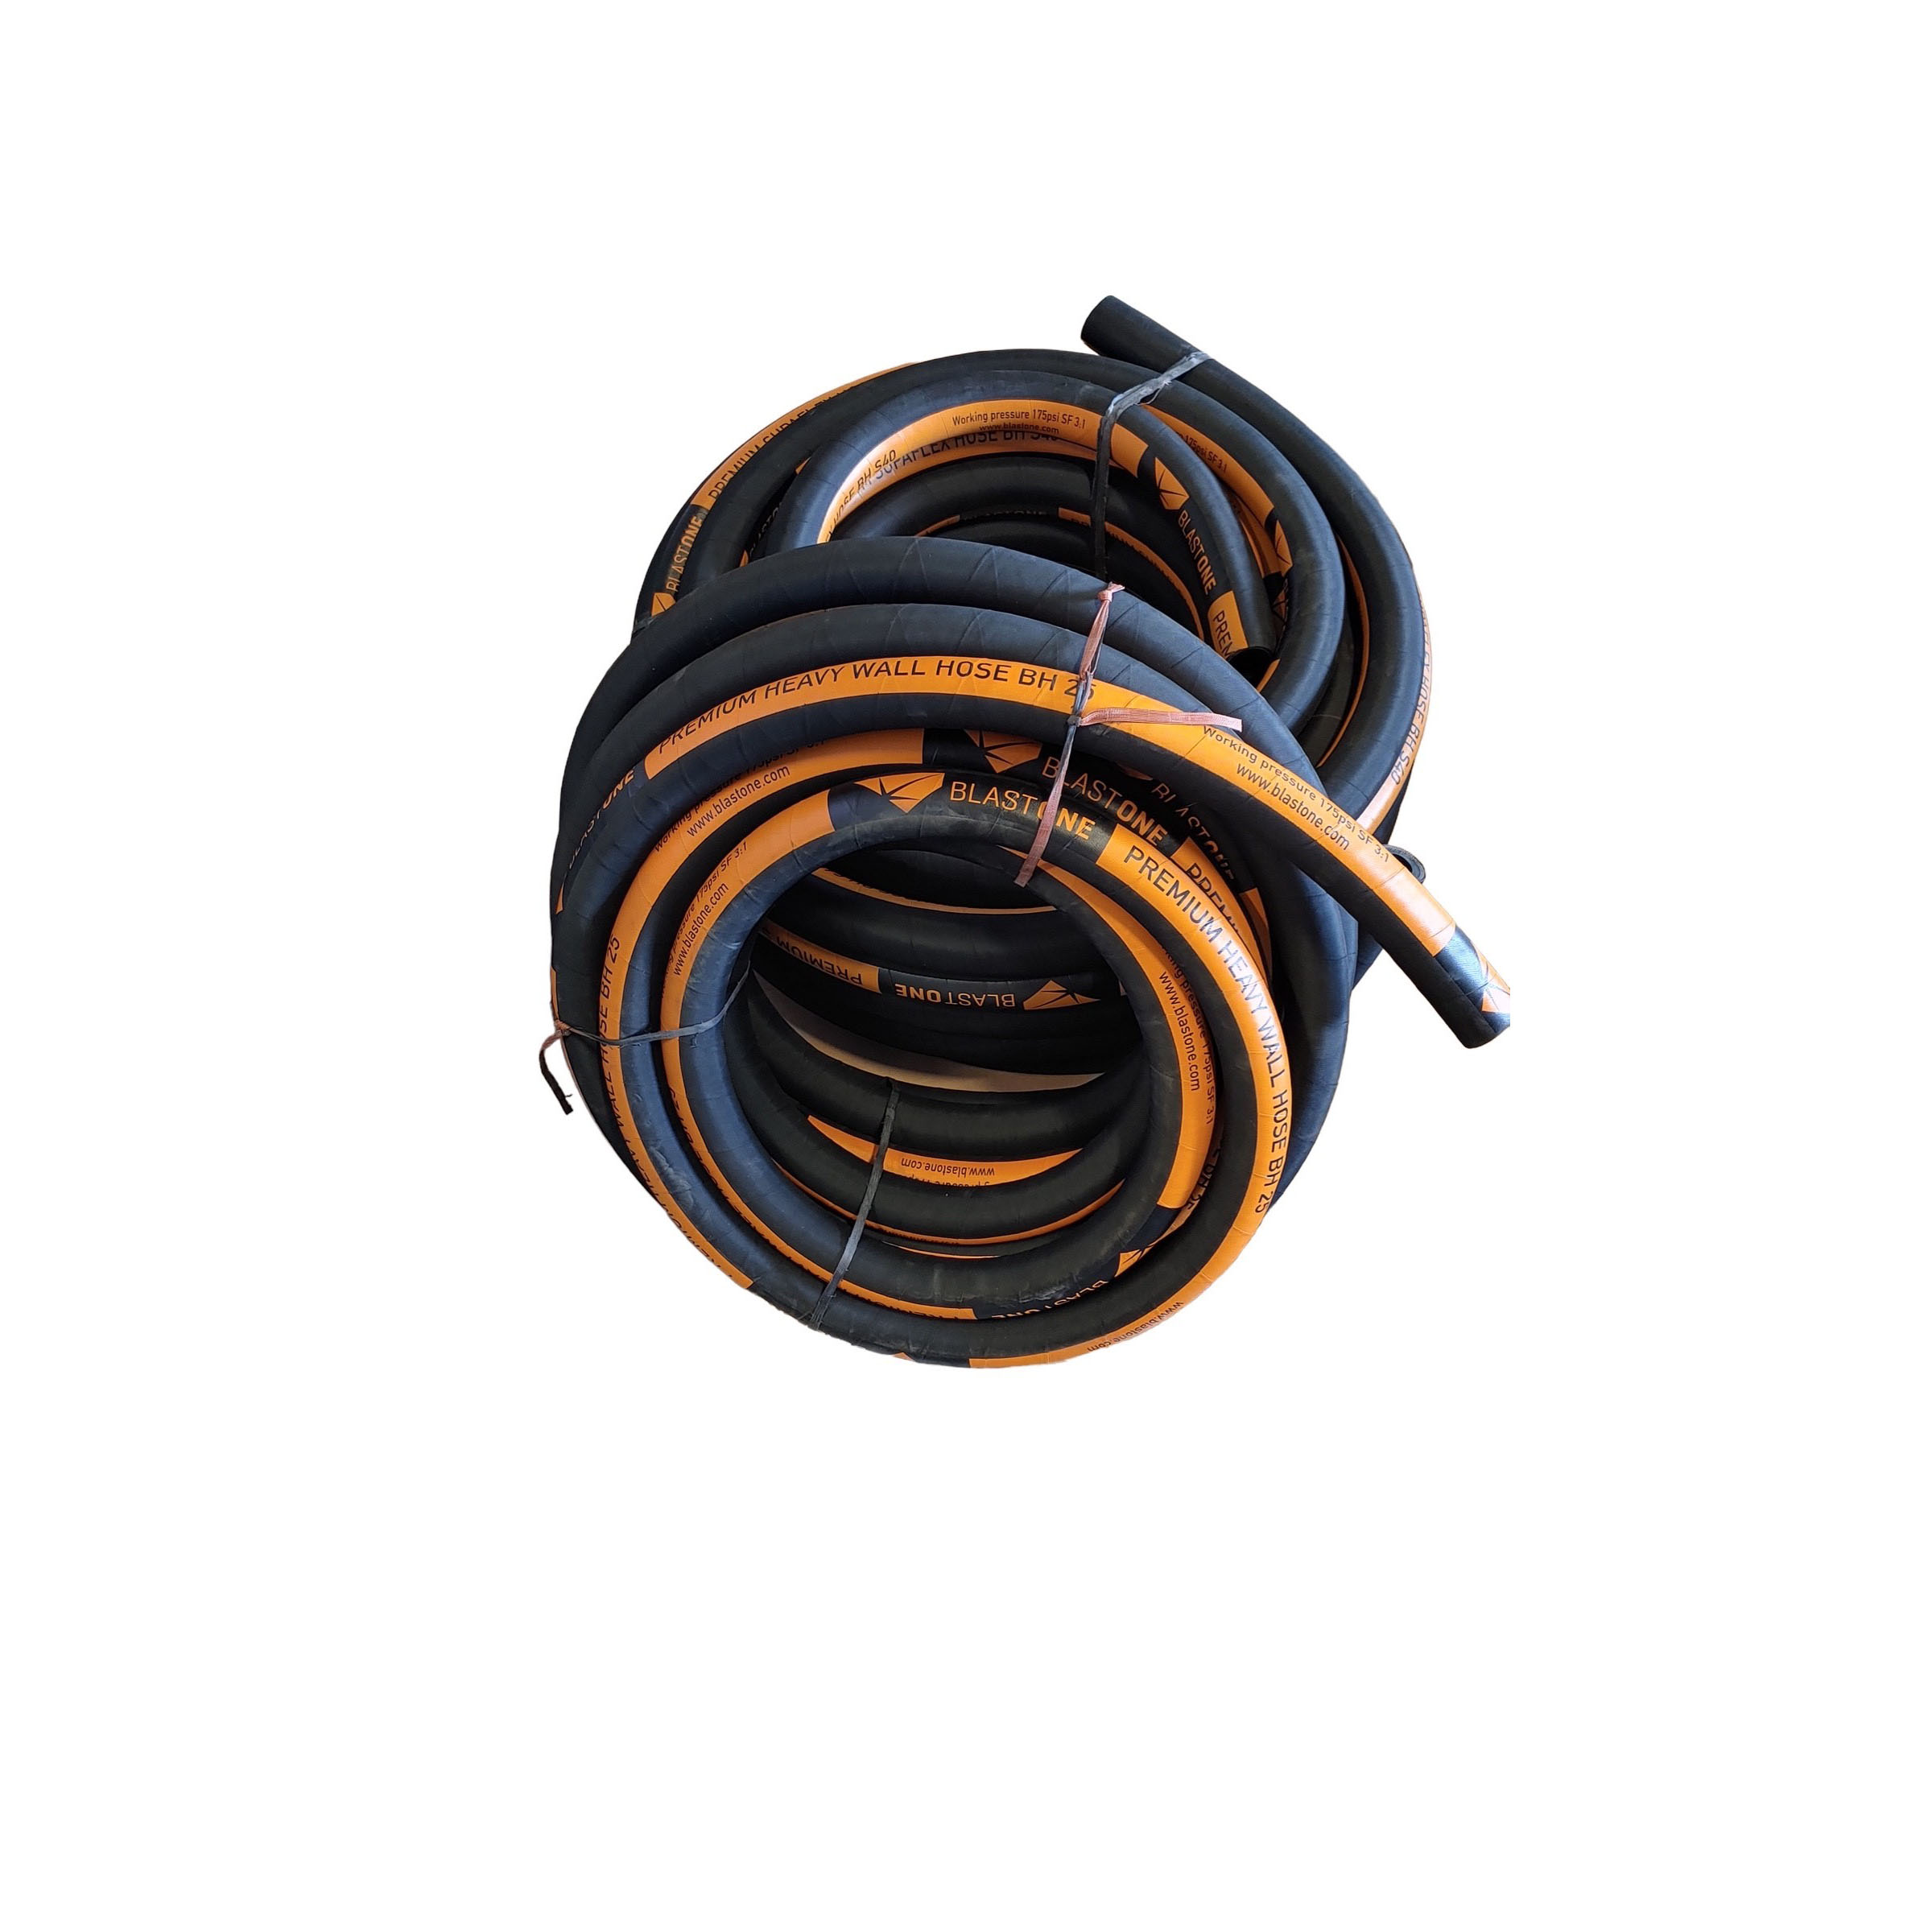 Unfitted Blast Hose - Heavy Wall 4ply